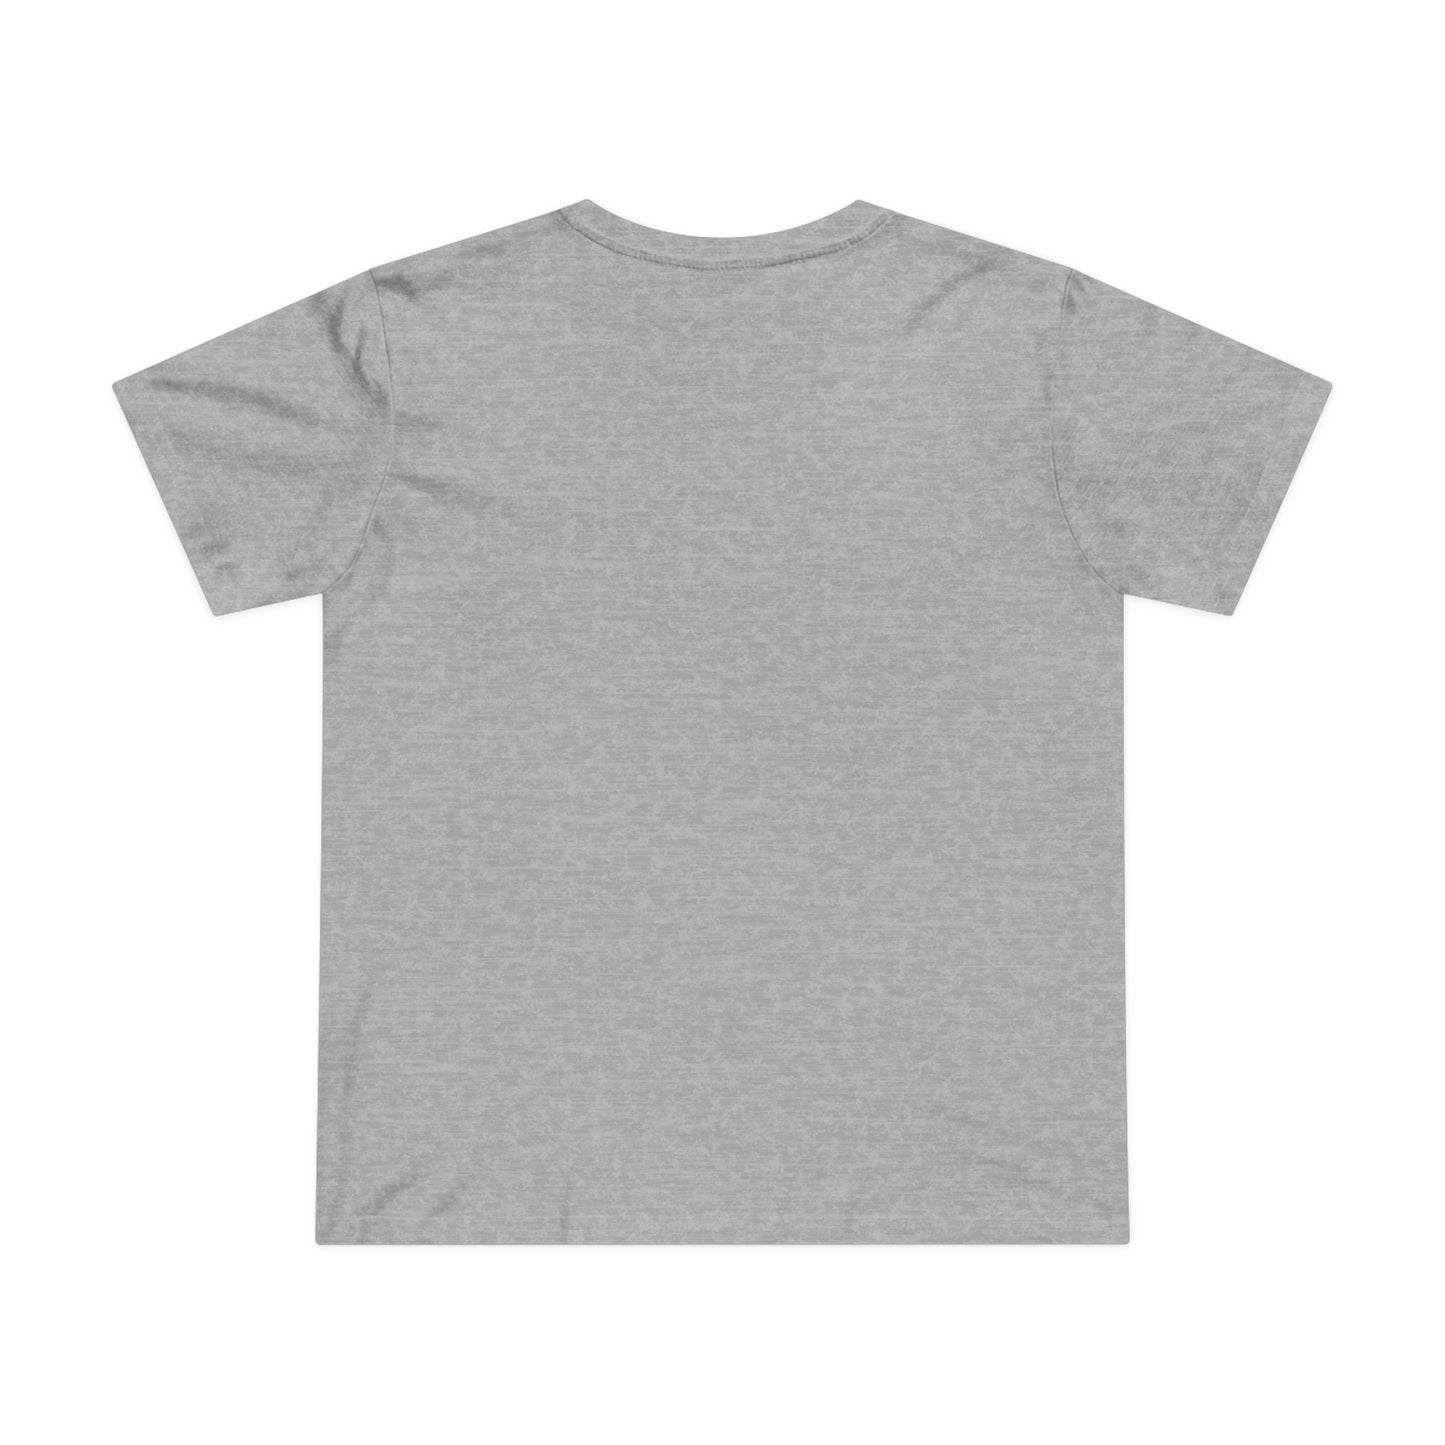 Too many tabs opened - Women’s Maple Tee (B-003 for AU, NZ market)